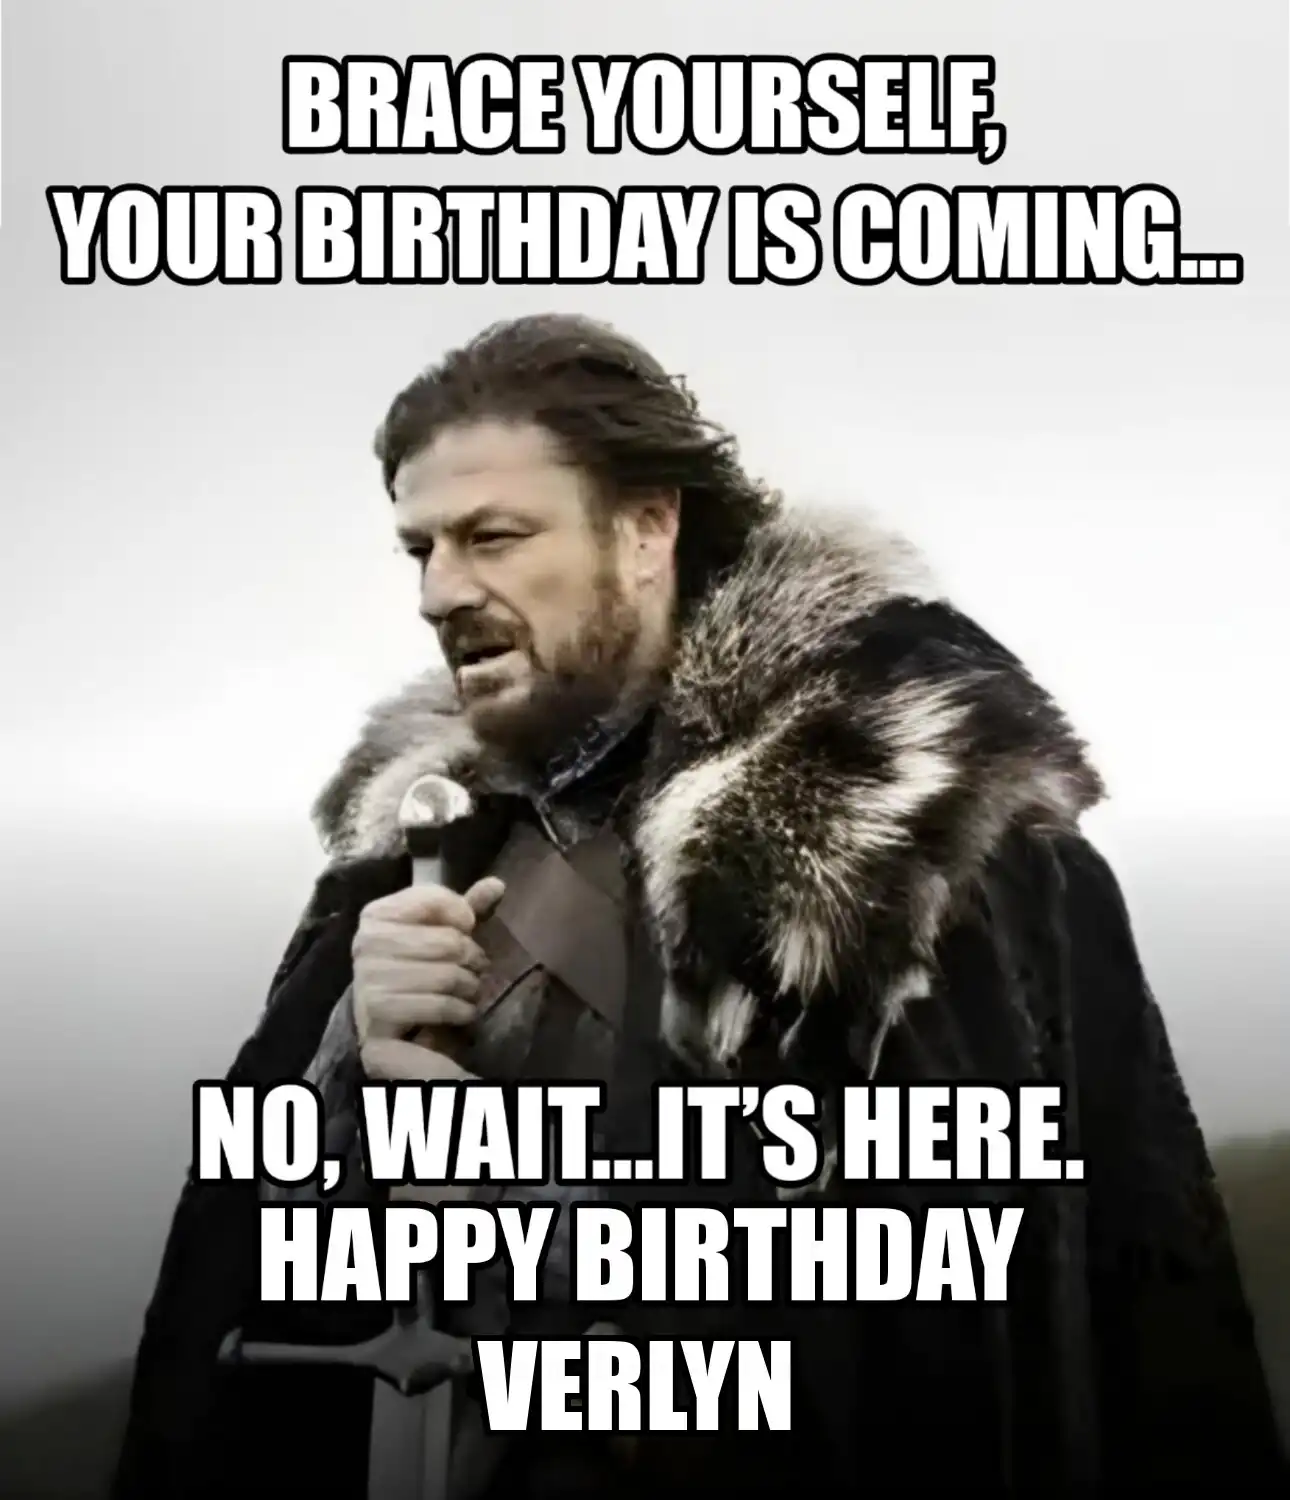 Happy Birthday Verlyn Brace Yourself Your Birthday Is Coming Meme